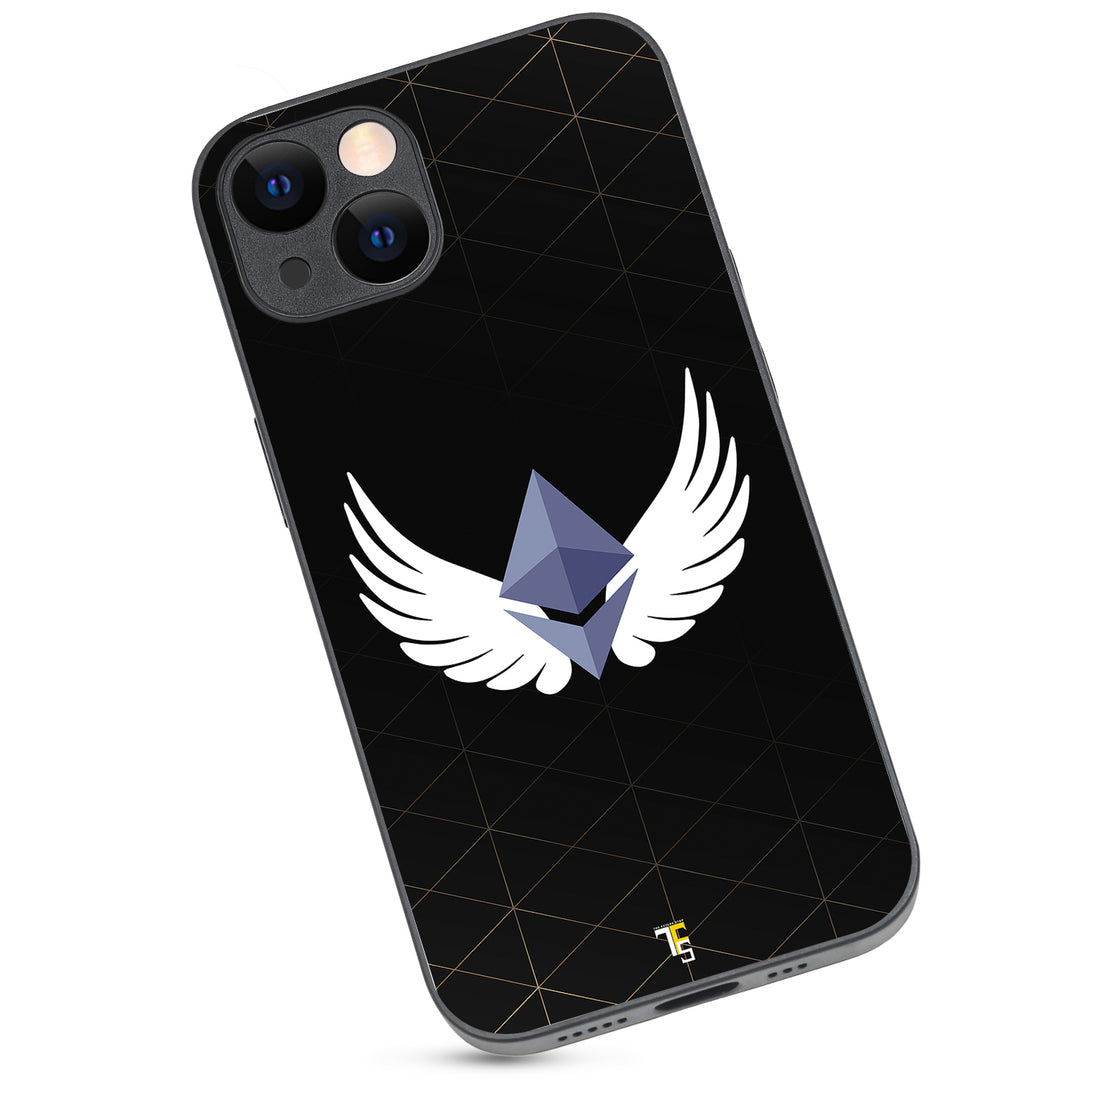 Ethereum Wings Trading iPhone 13 Case